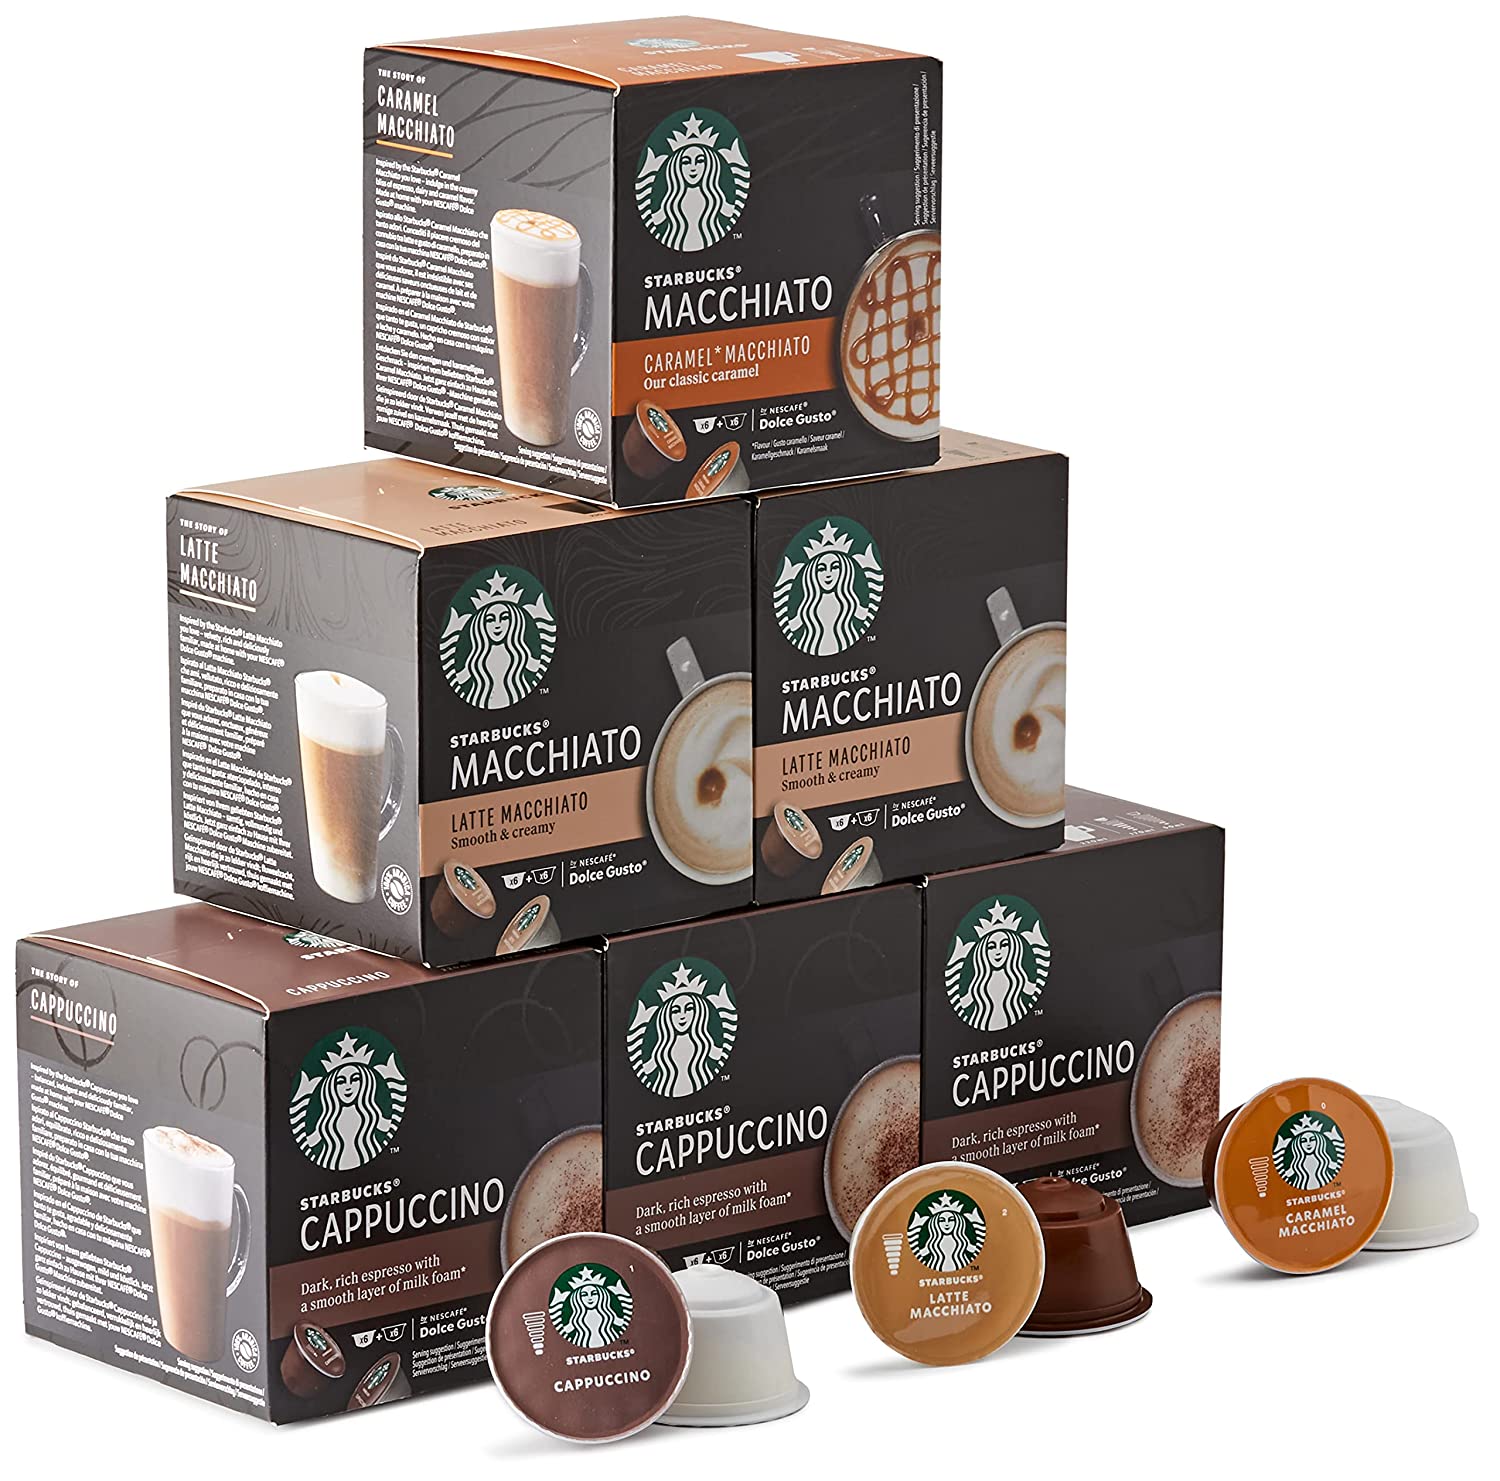 STARBUCKS by NESCAFÉ Dolce Gustto Capsules Tasting Set, 36 Drinks from 72 Capsules Latte Coffee Variations (6 x 12)